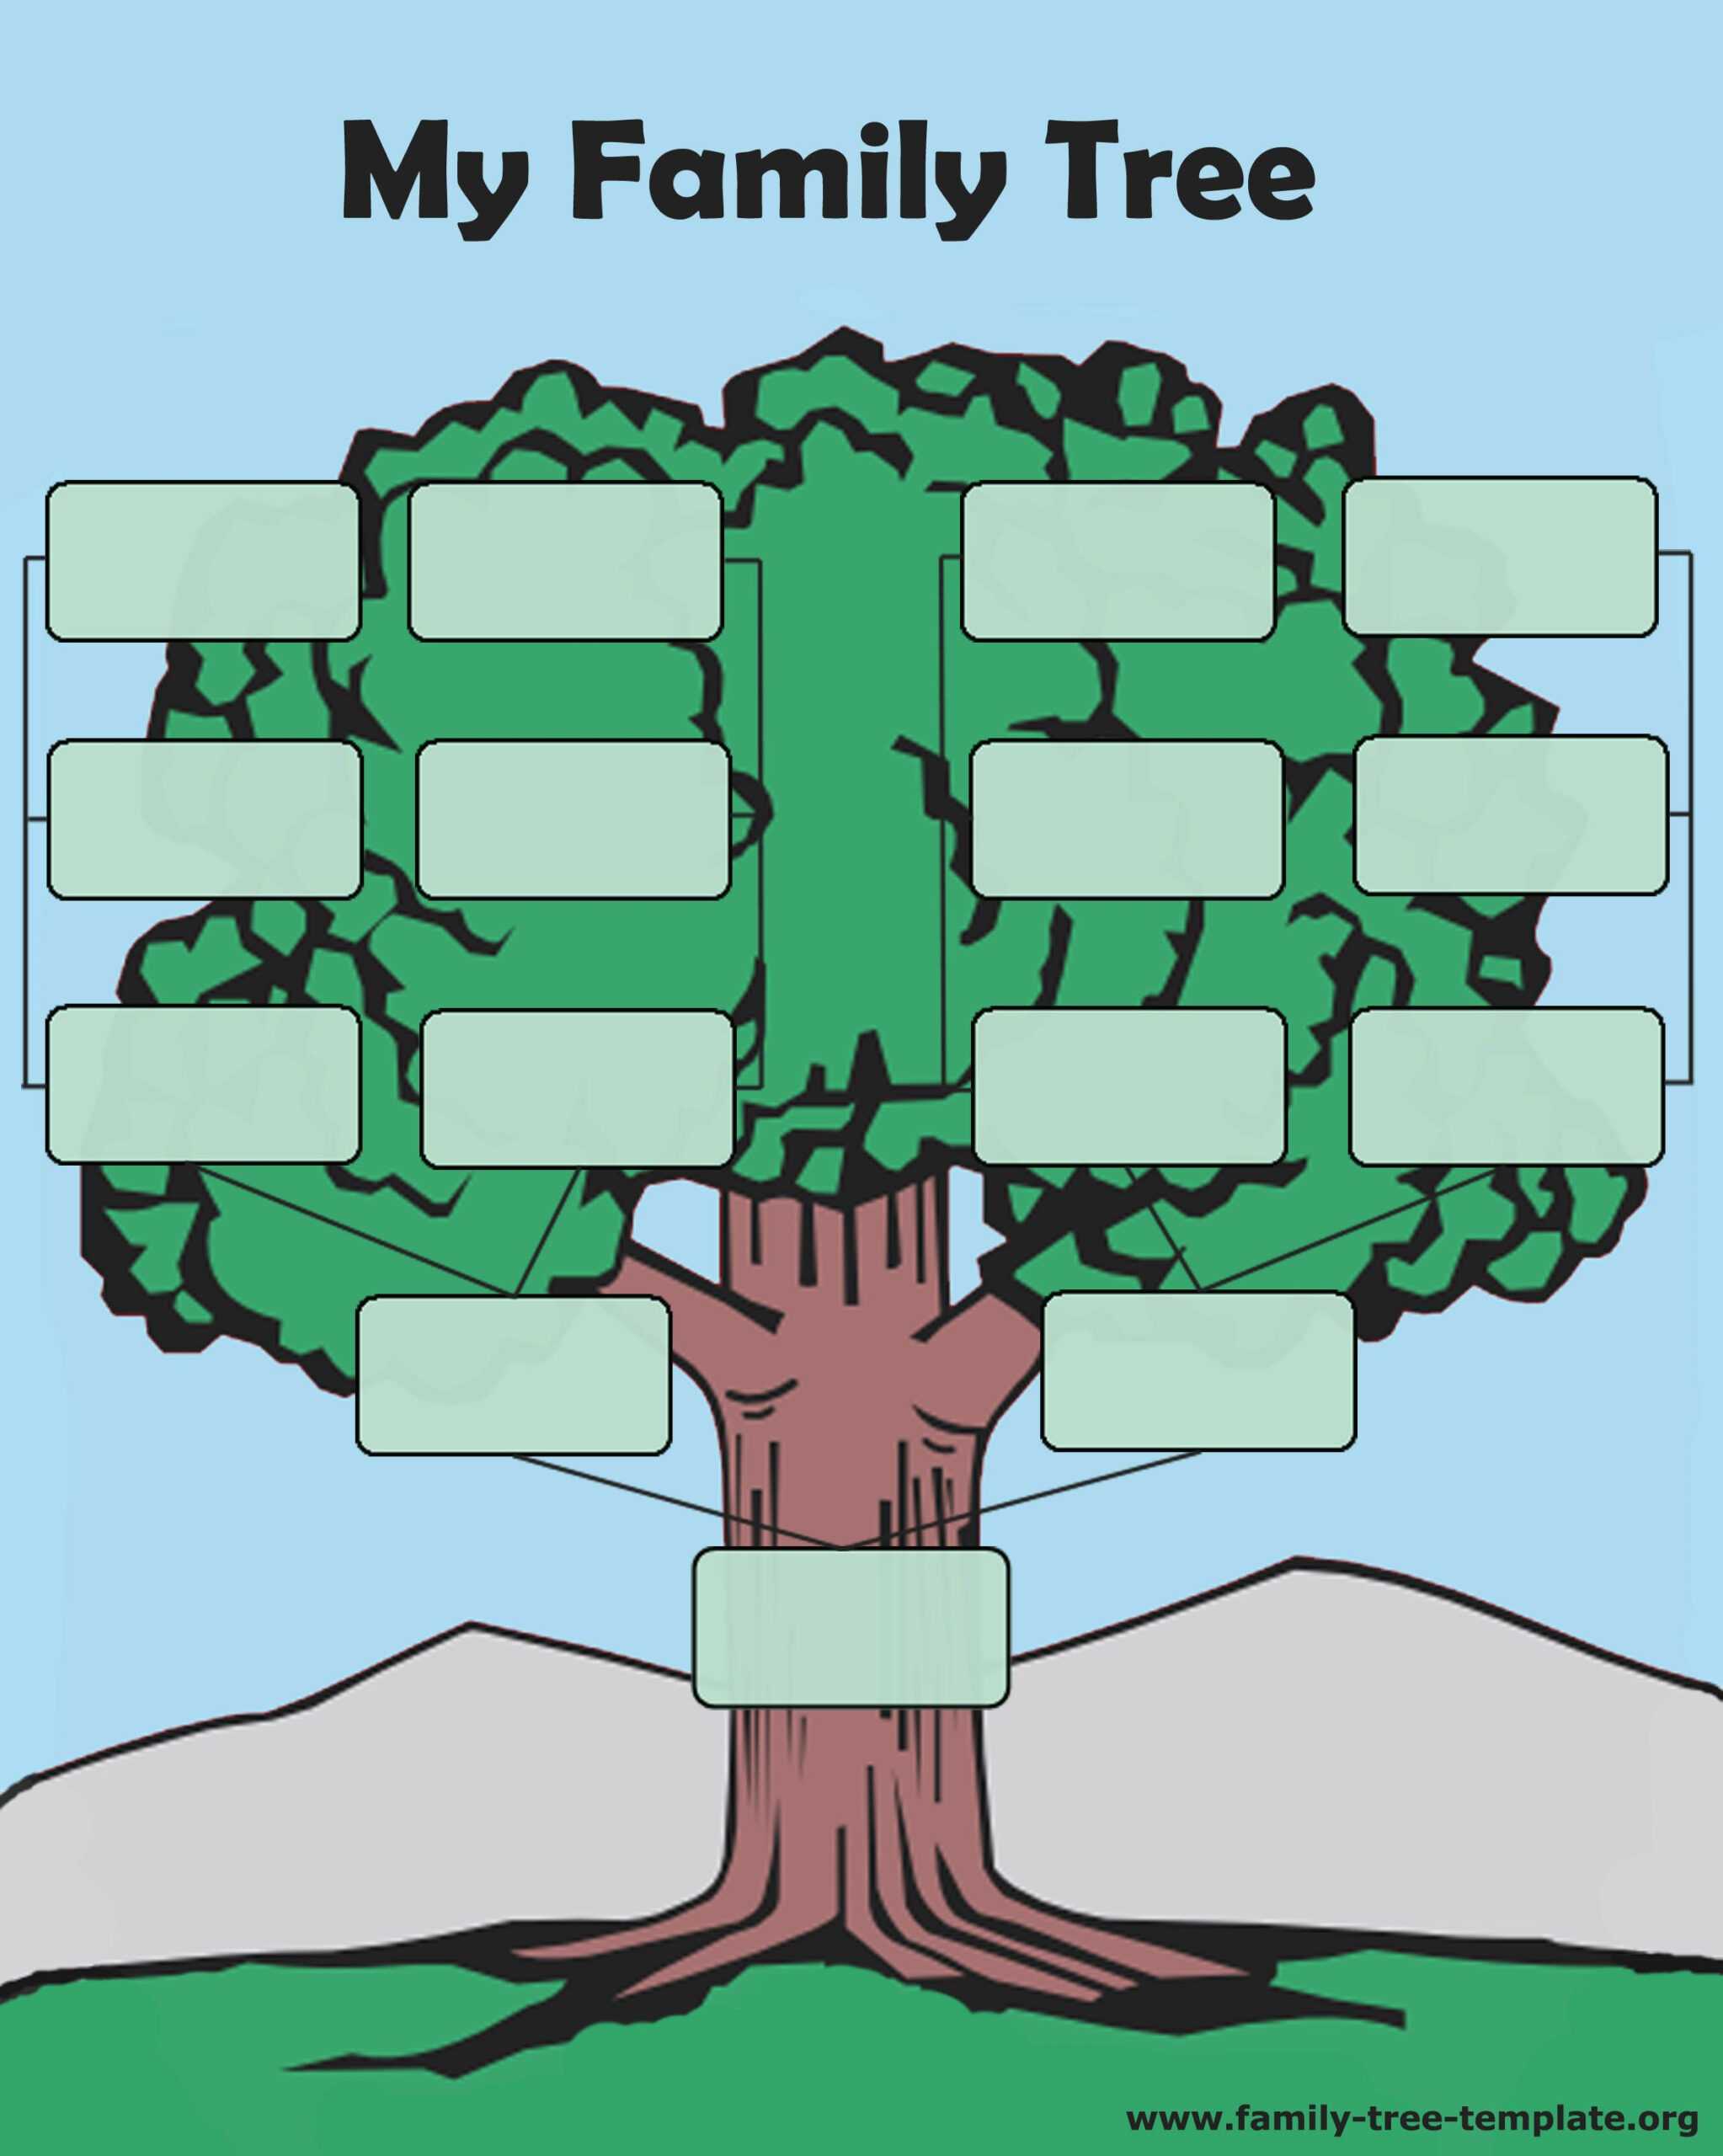 Tree Forms To Print And Fill Out Another Printable Oak Tree In Fill In The Blank Family Tree Template